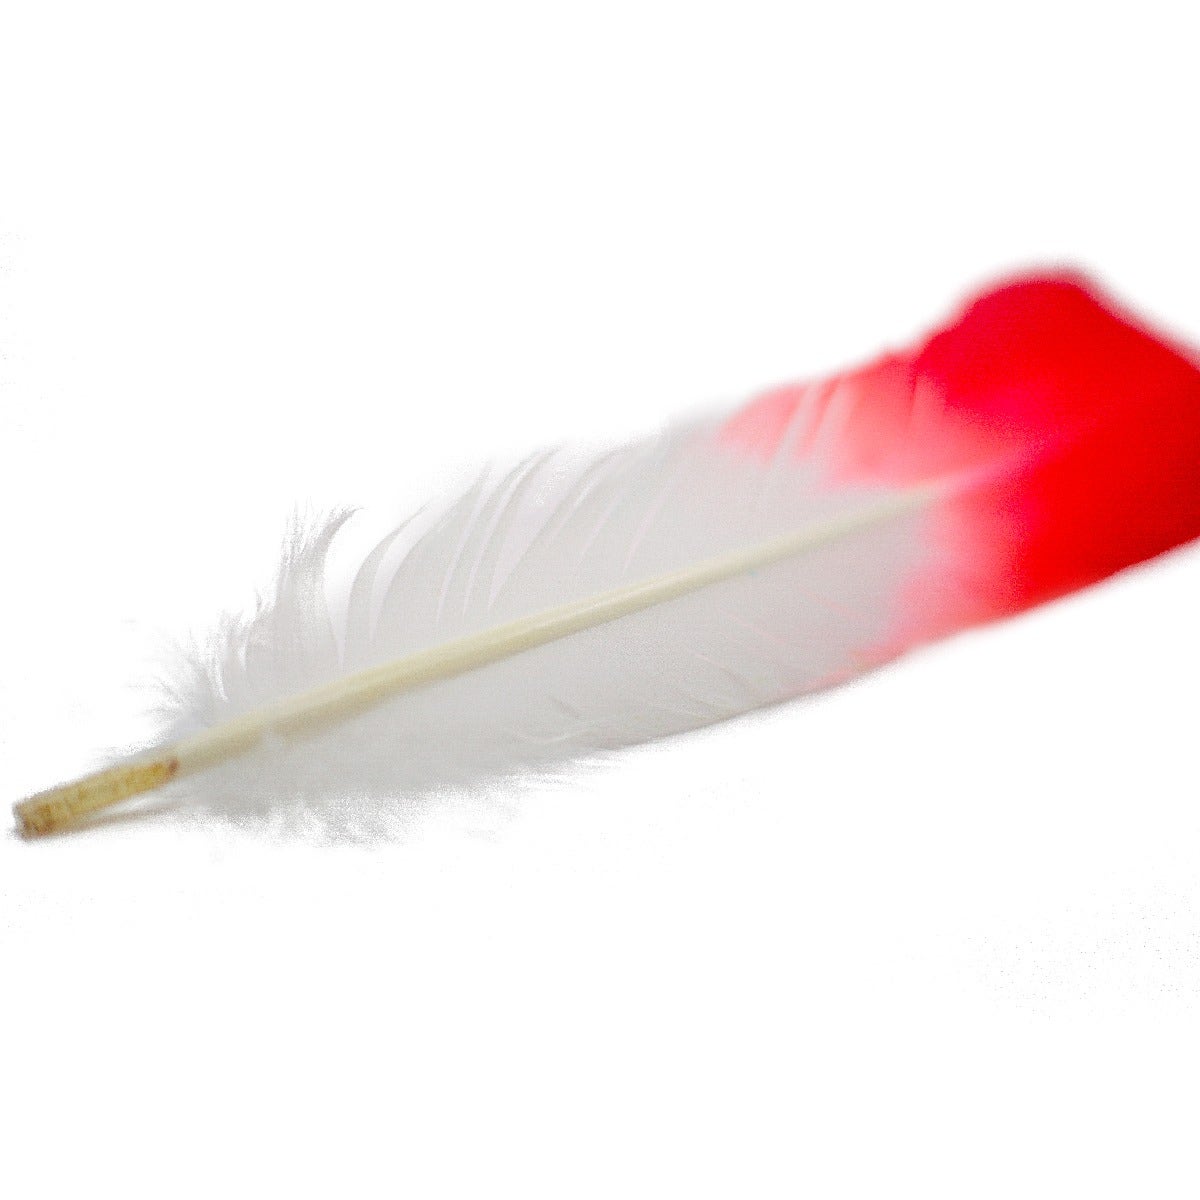 Ombré Turkey Quill Feathers 10-12” 2 pc - Coral/White